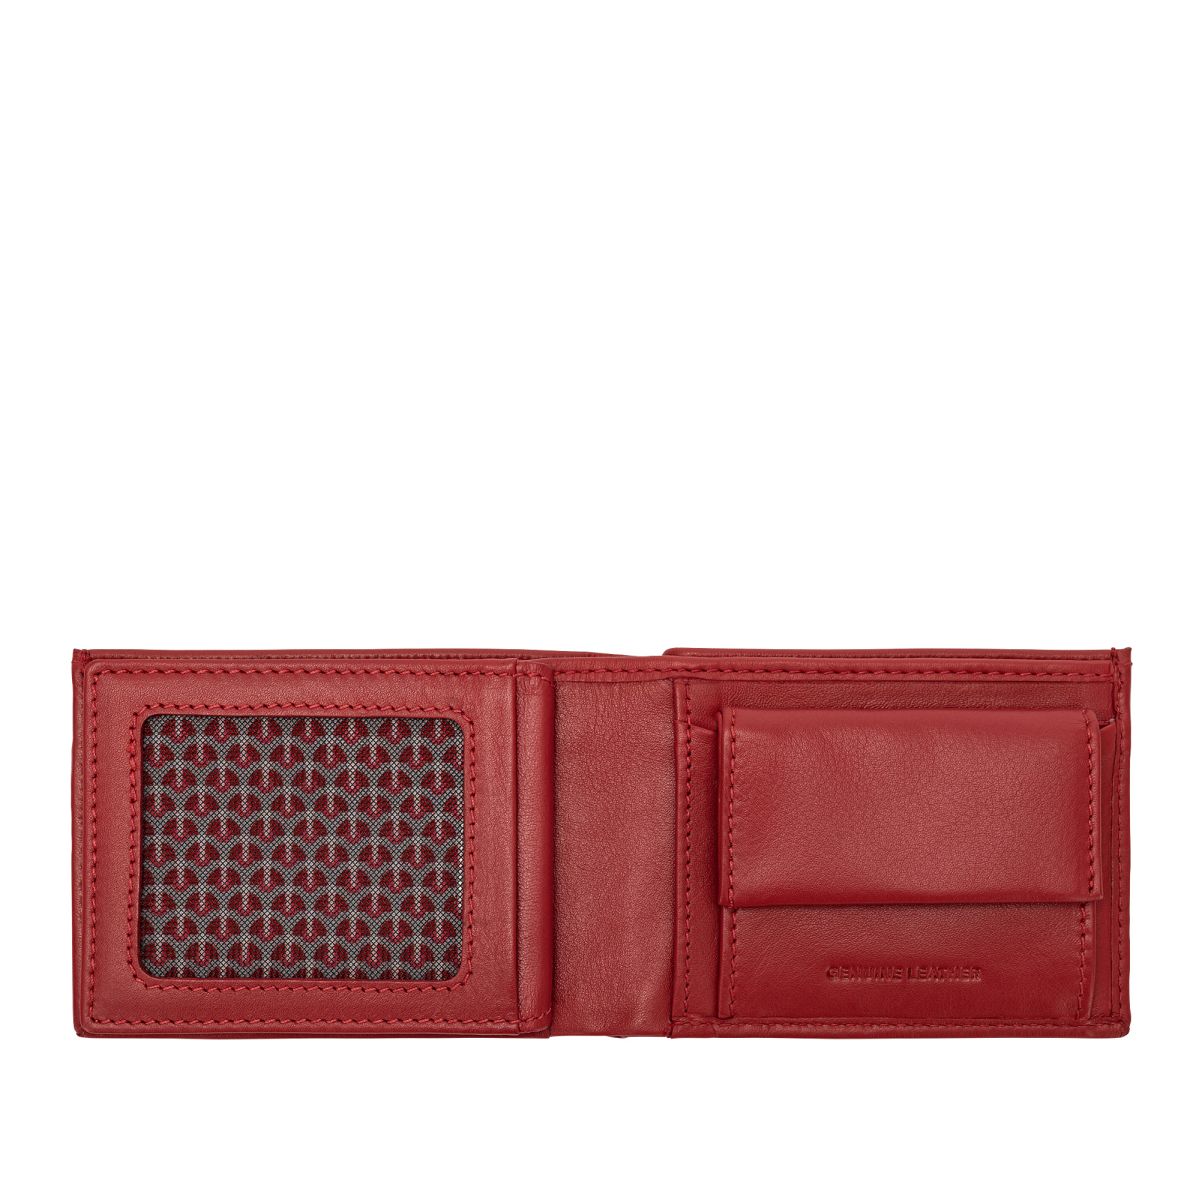 Small mens minimalist wallet with coins pocket - Red